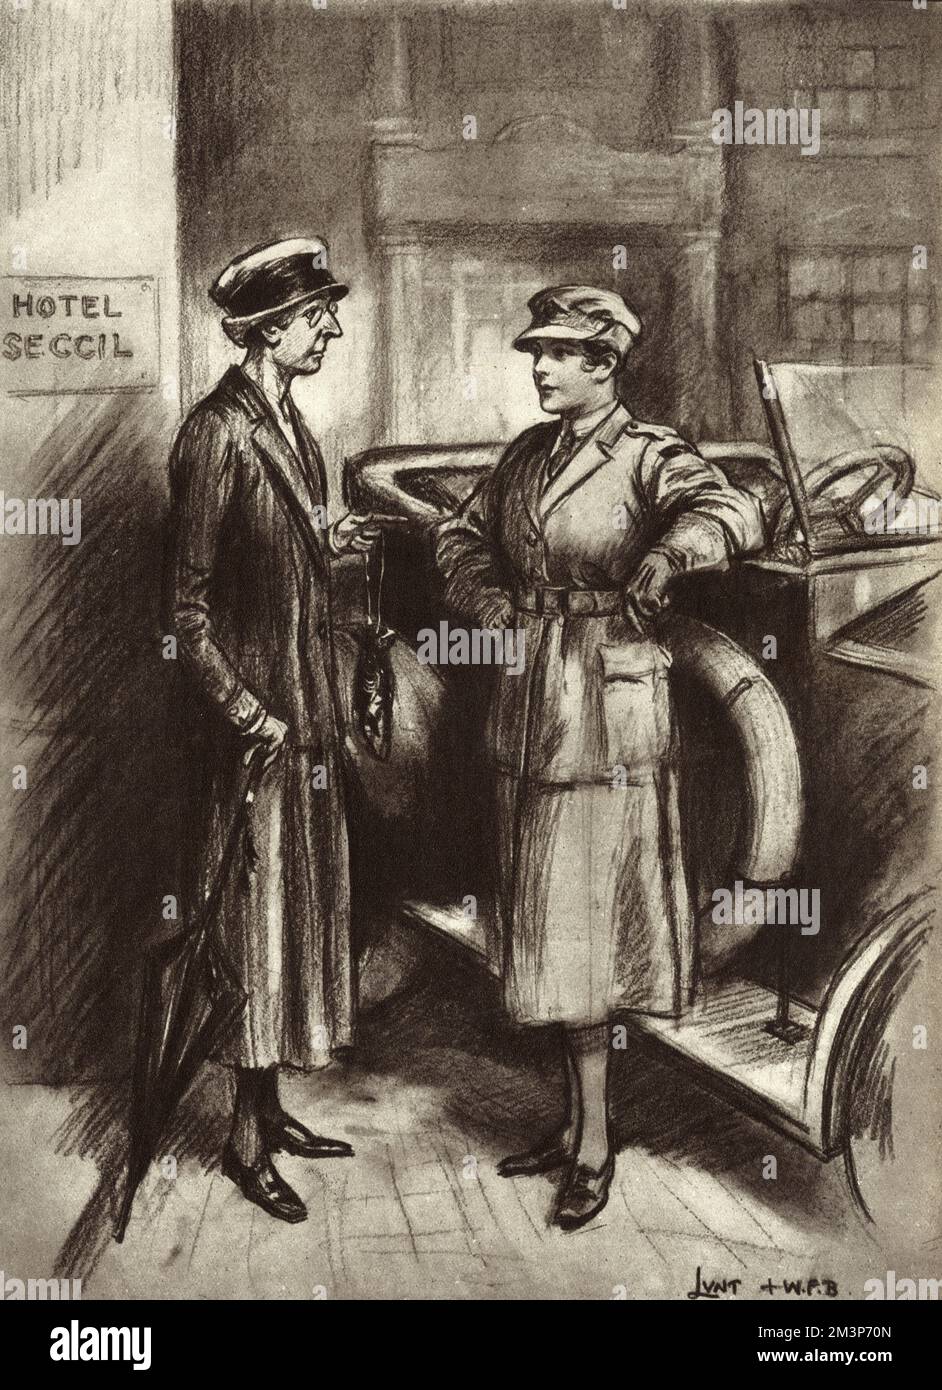 An ex-WRAF (Women's Royal Air Force) worker asks her pretty friend who is still in uniform and acting as a driver, 'I wonder why they demobbed me before you?  Don't you, Maude.'     Date: 1919 Stock Photo